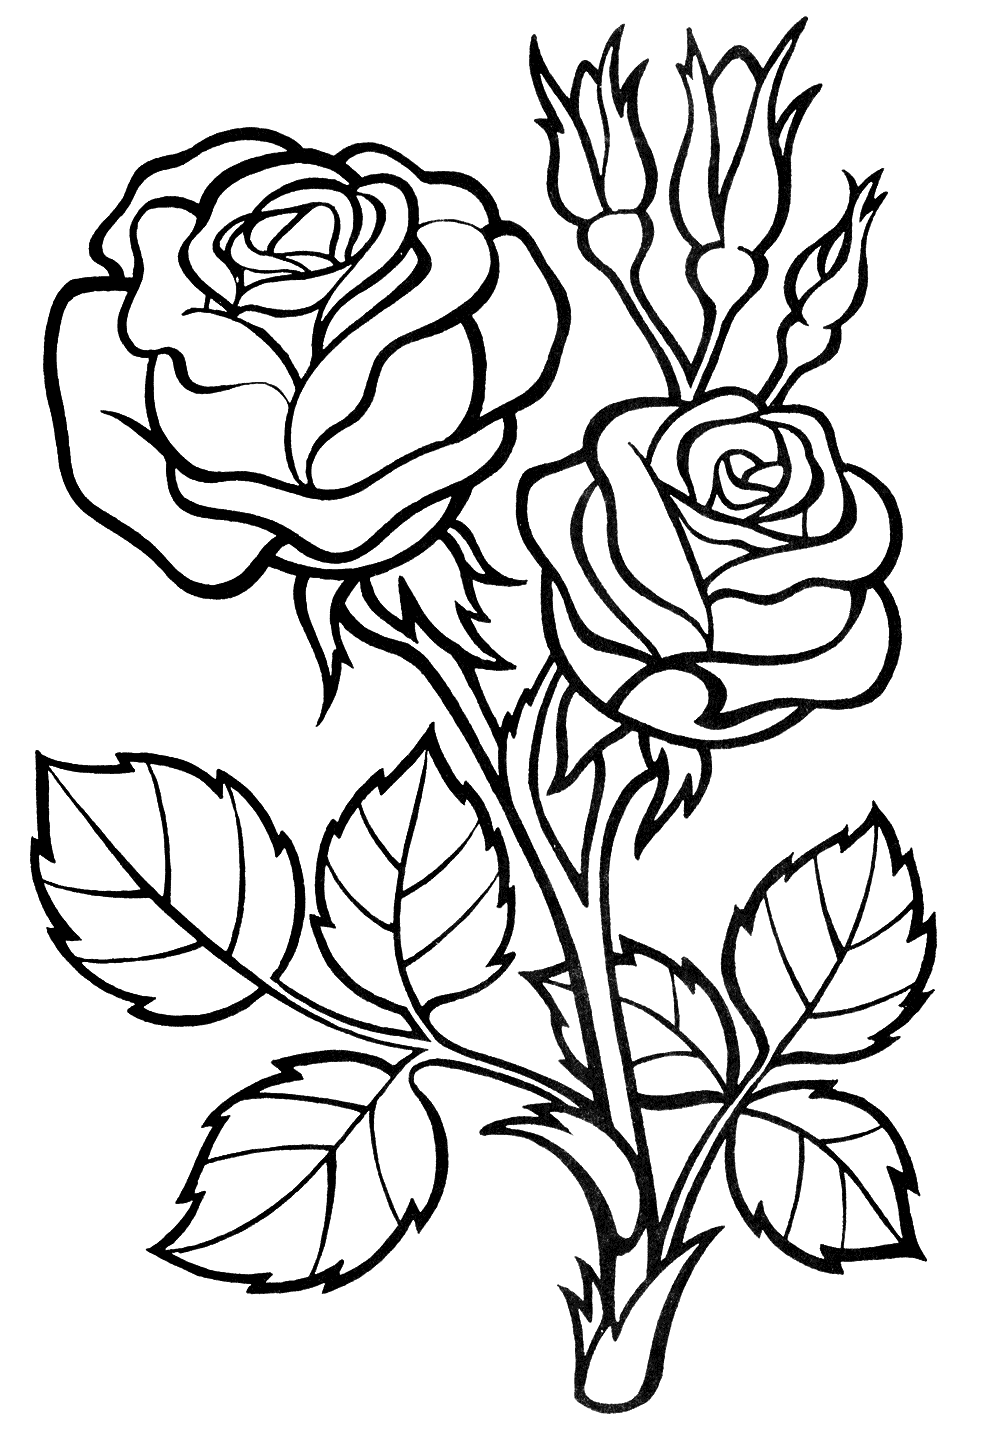 Roses coloring pages to download and print for free